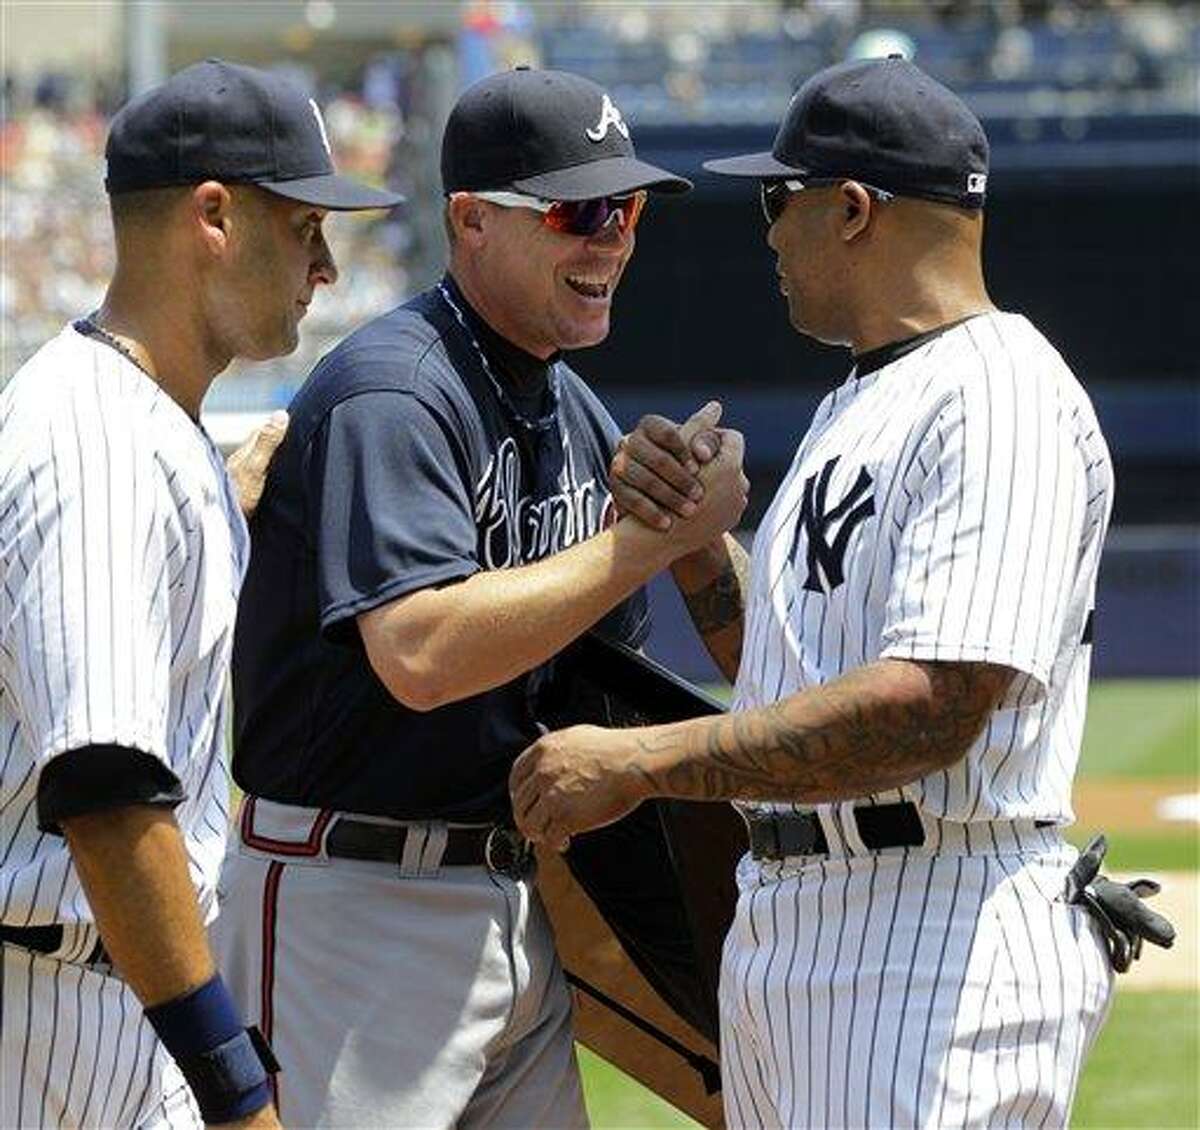 Yankees newest outfielder, Andruw Jones, surprised to be in spring training  with Bombers at age 34 – New York Daily News